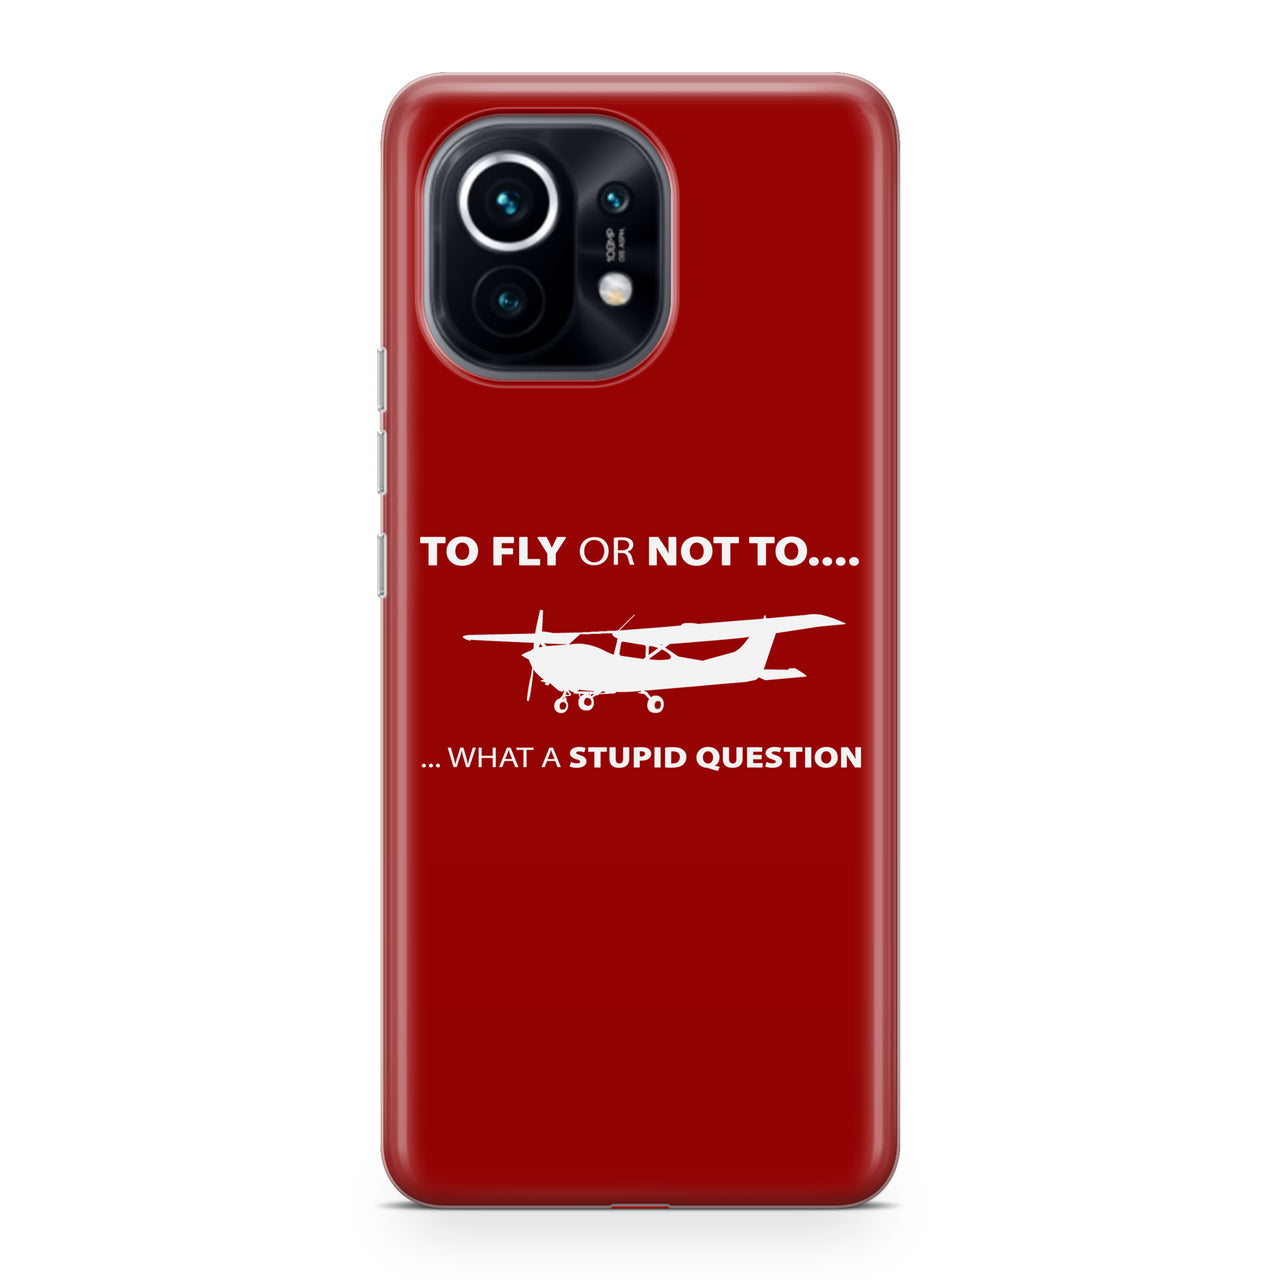 To Fly or Not To What a Stupid Question Designed Xiaomi Cases